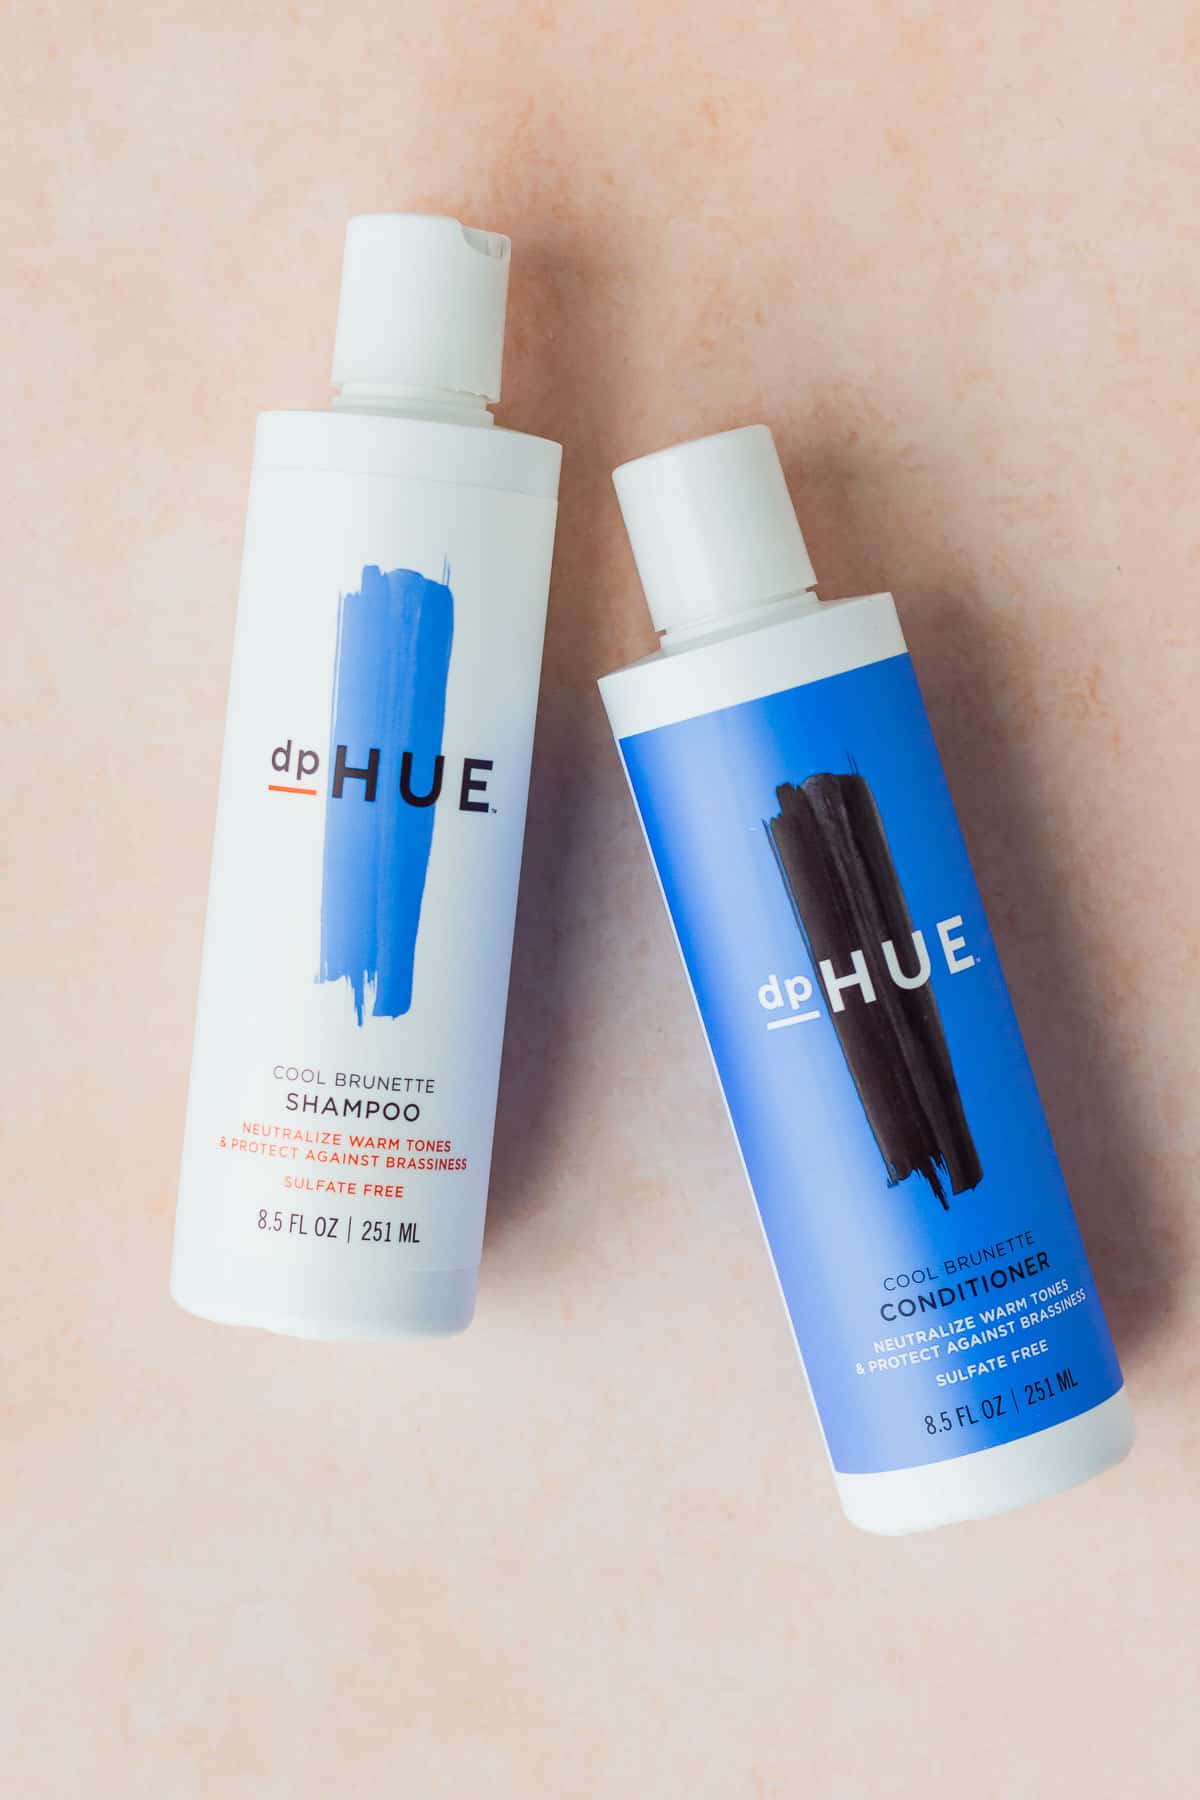 DpHUE brunette shampoo and conditioner